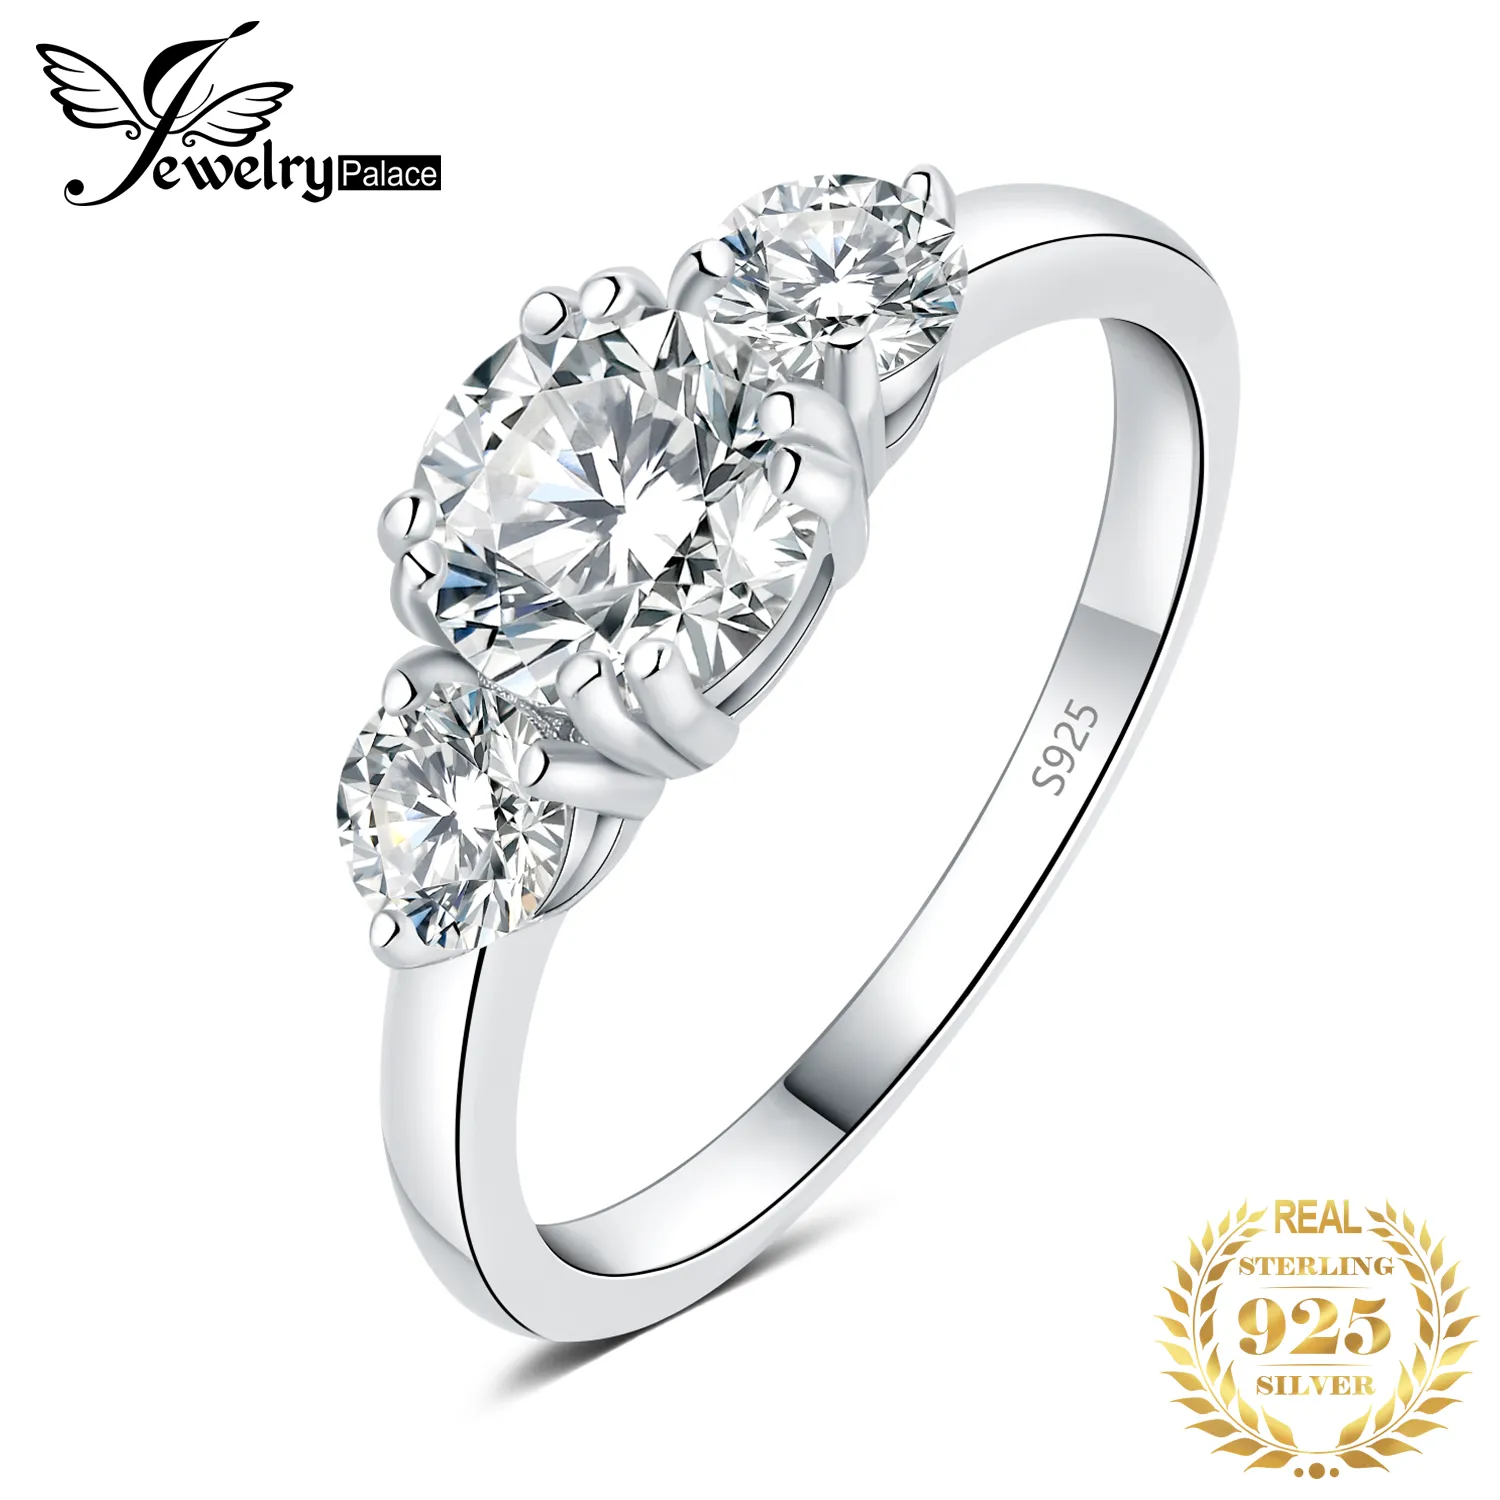 JewelryPalace Moissanite D Color 1.4ct 925 Sterling Silver 3 Stone Wedding Engagement Ring for Woman Yellow Rose Gold Plated